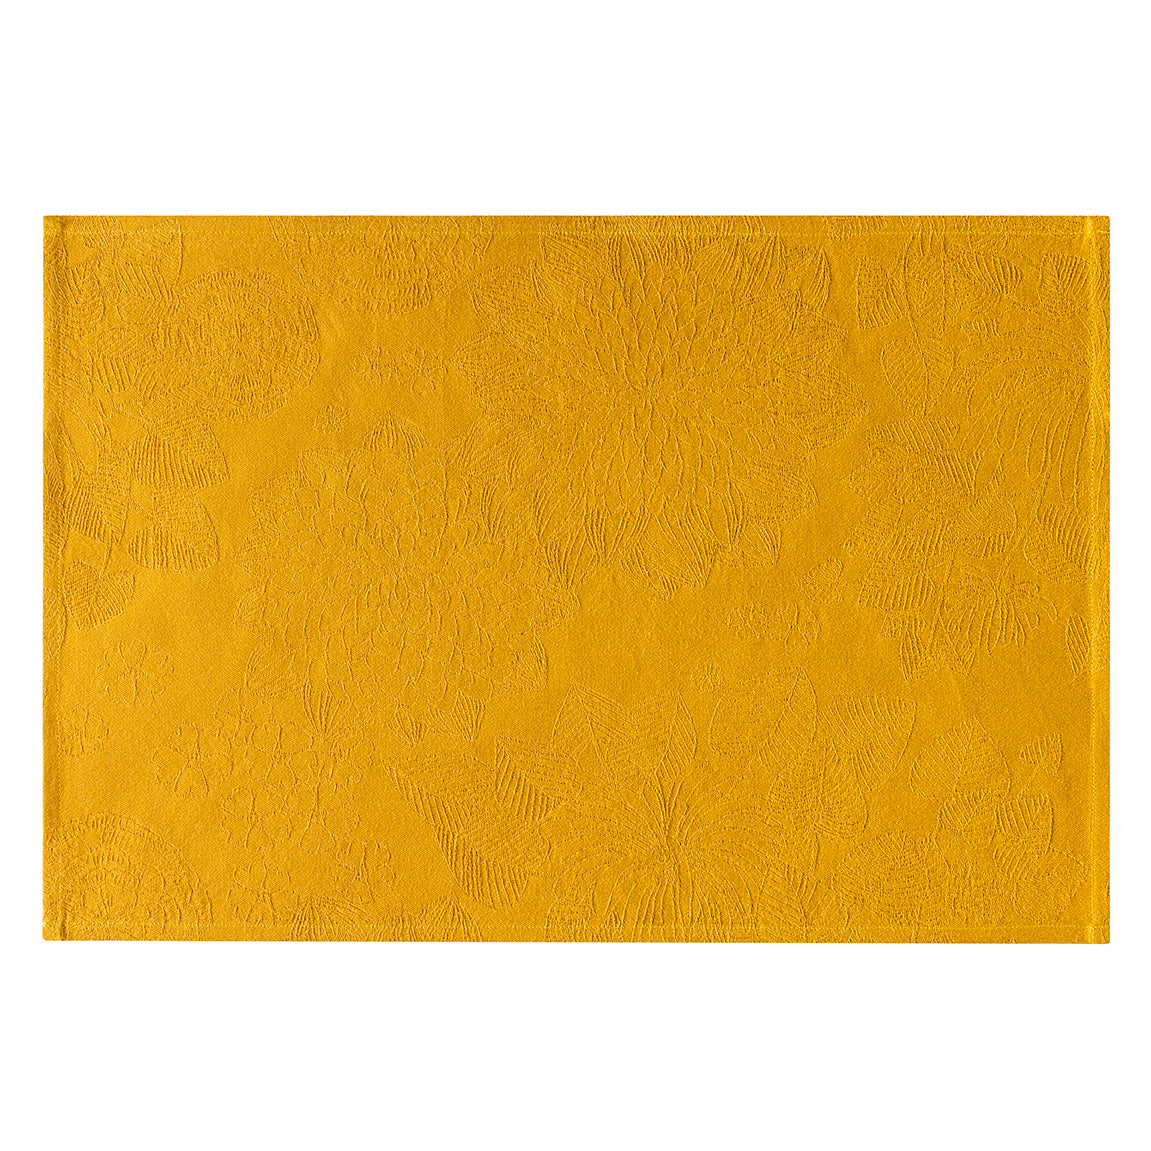 Marie-Galante Mustard Yellow, Set of 2 Coated Placemats